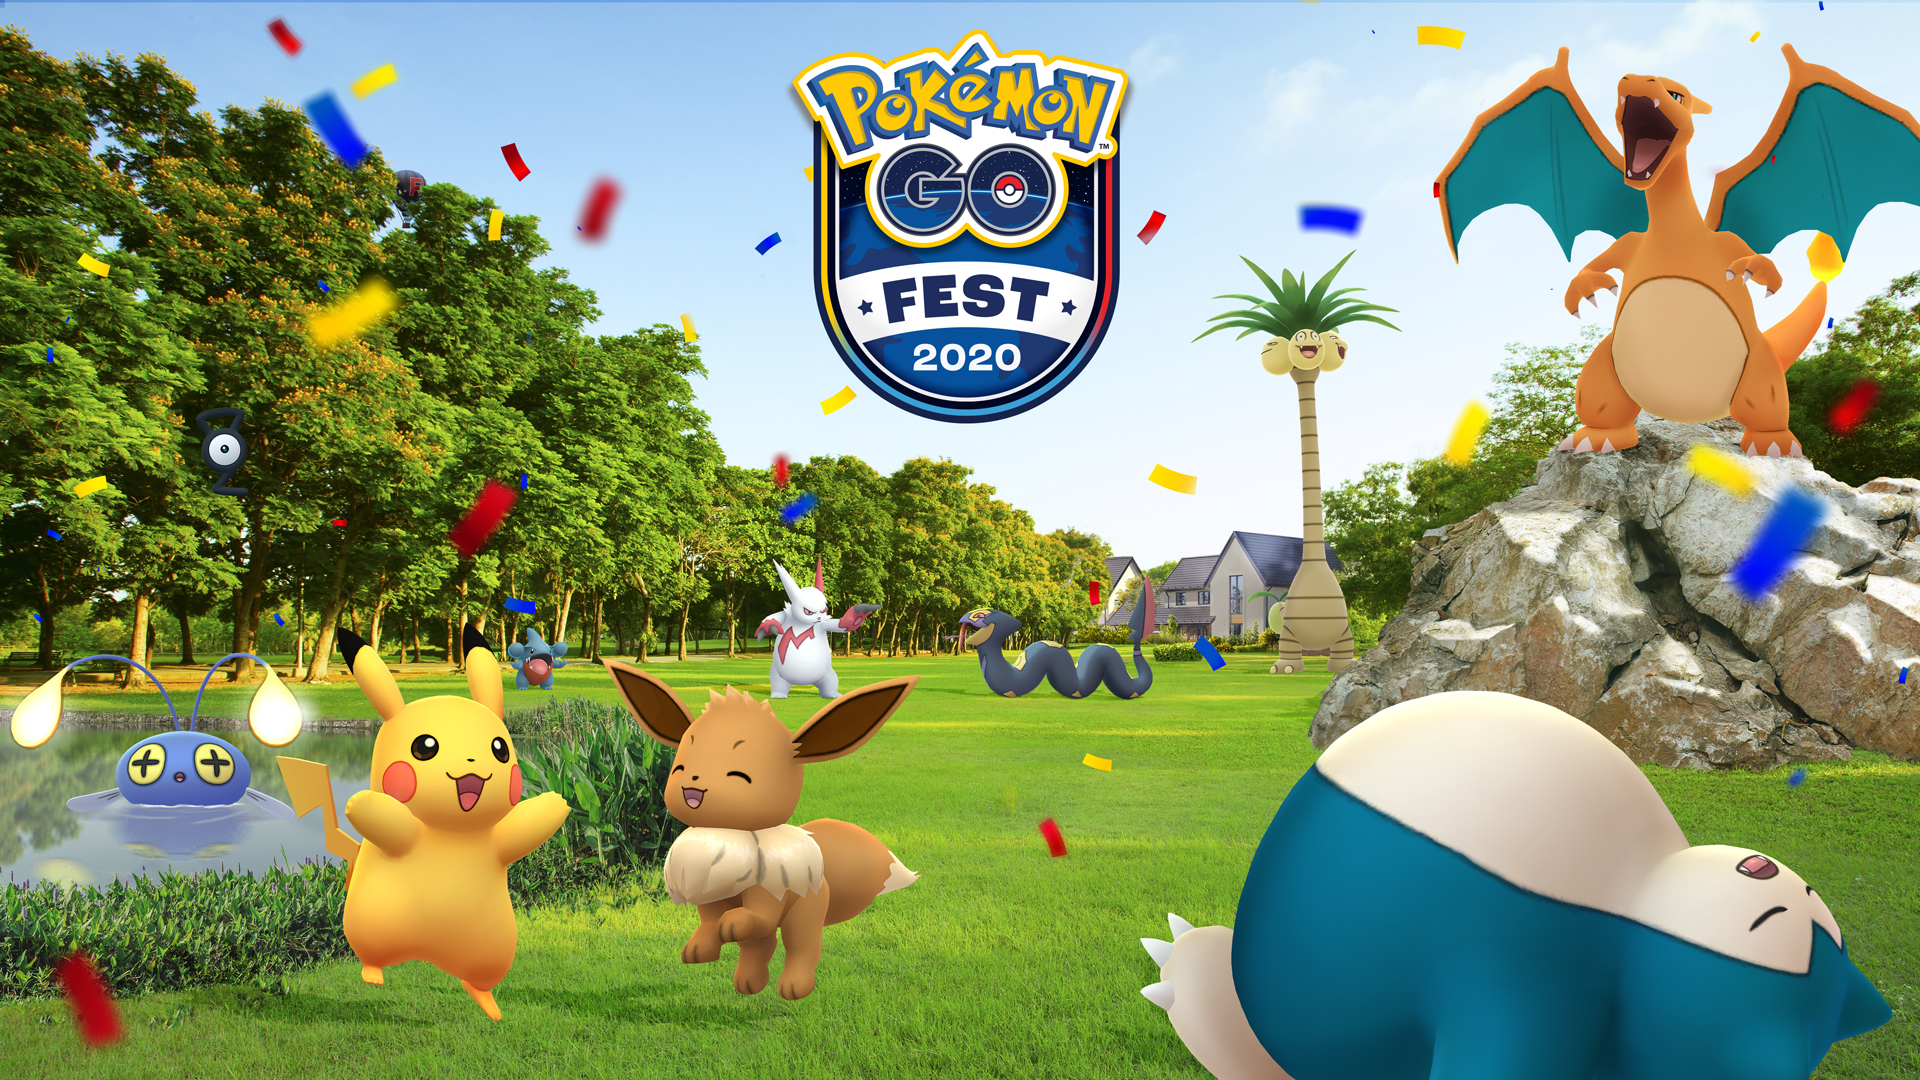 Pokemon Go Fest Battle Challenges For The July 10th Week!